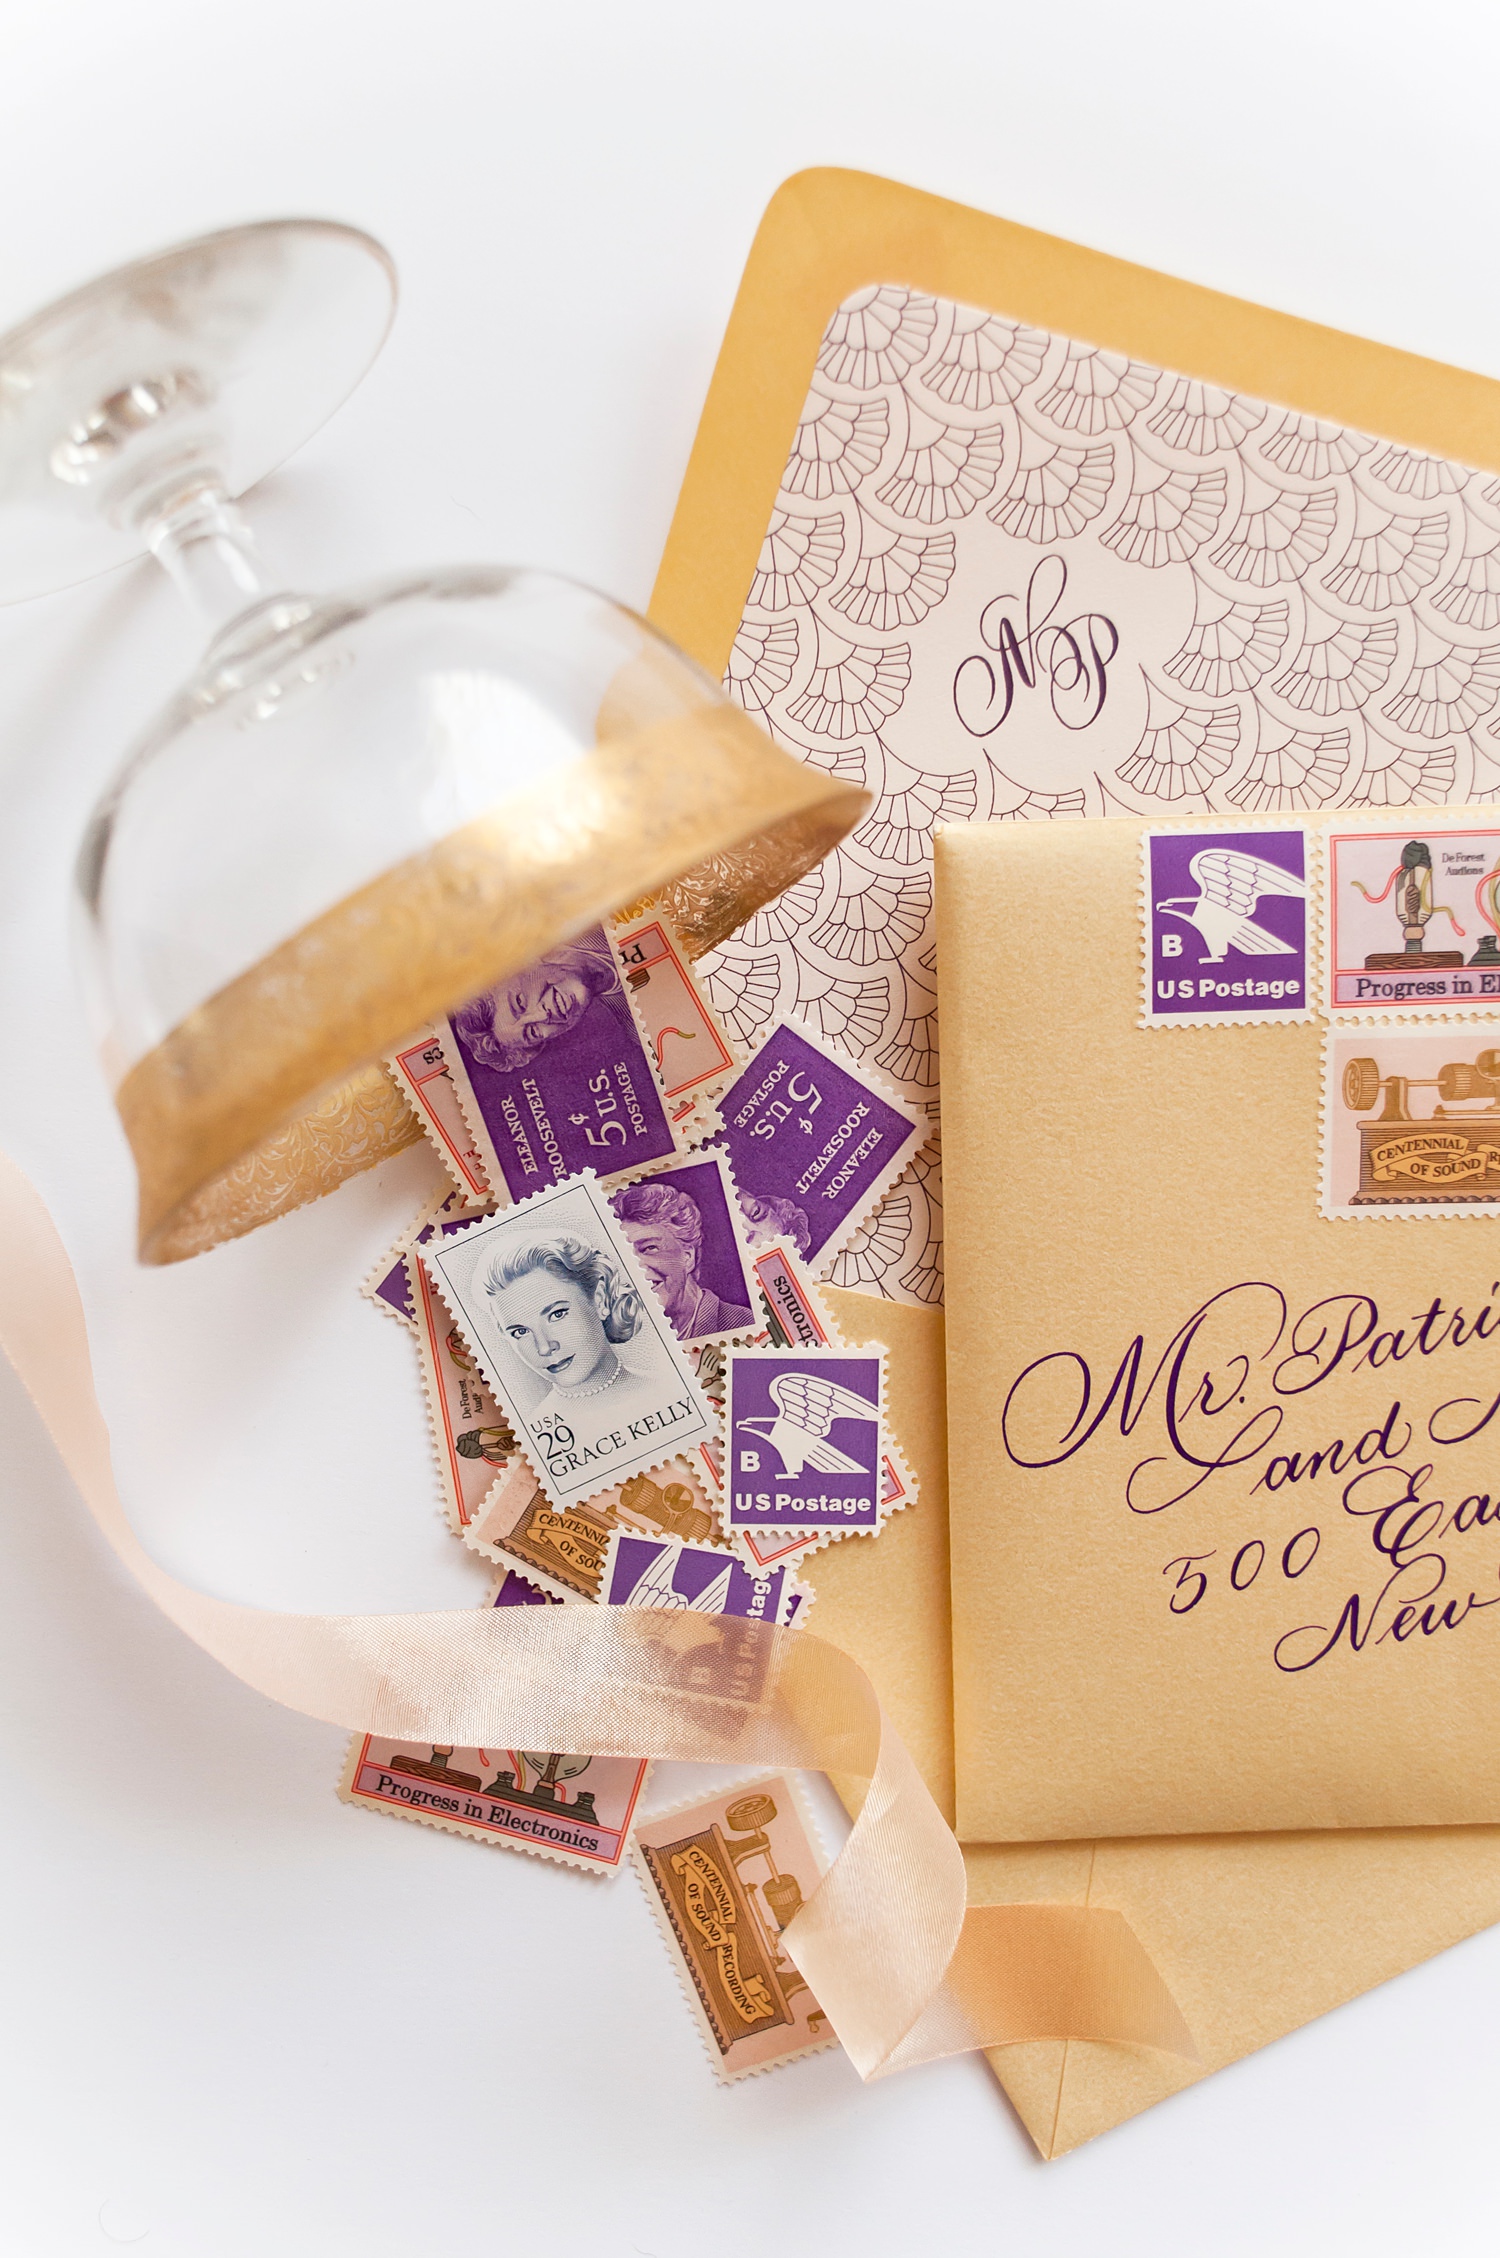 Gatsby themed wedding invites in blush pink, purple, and gold with letter press and laser cut details.